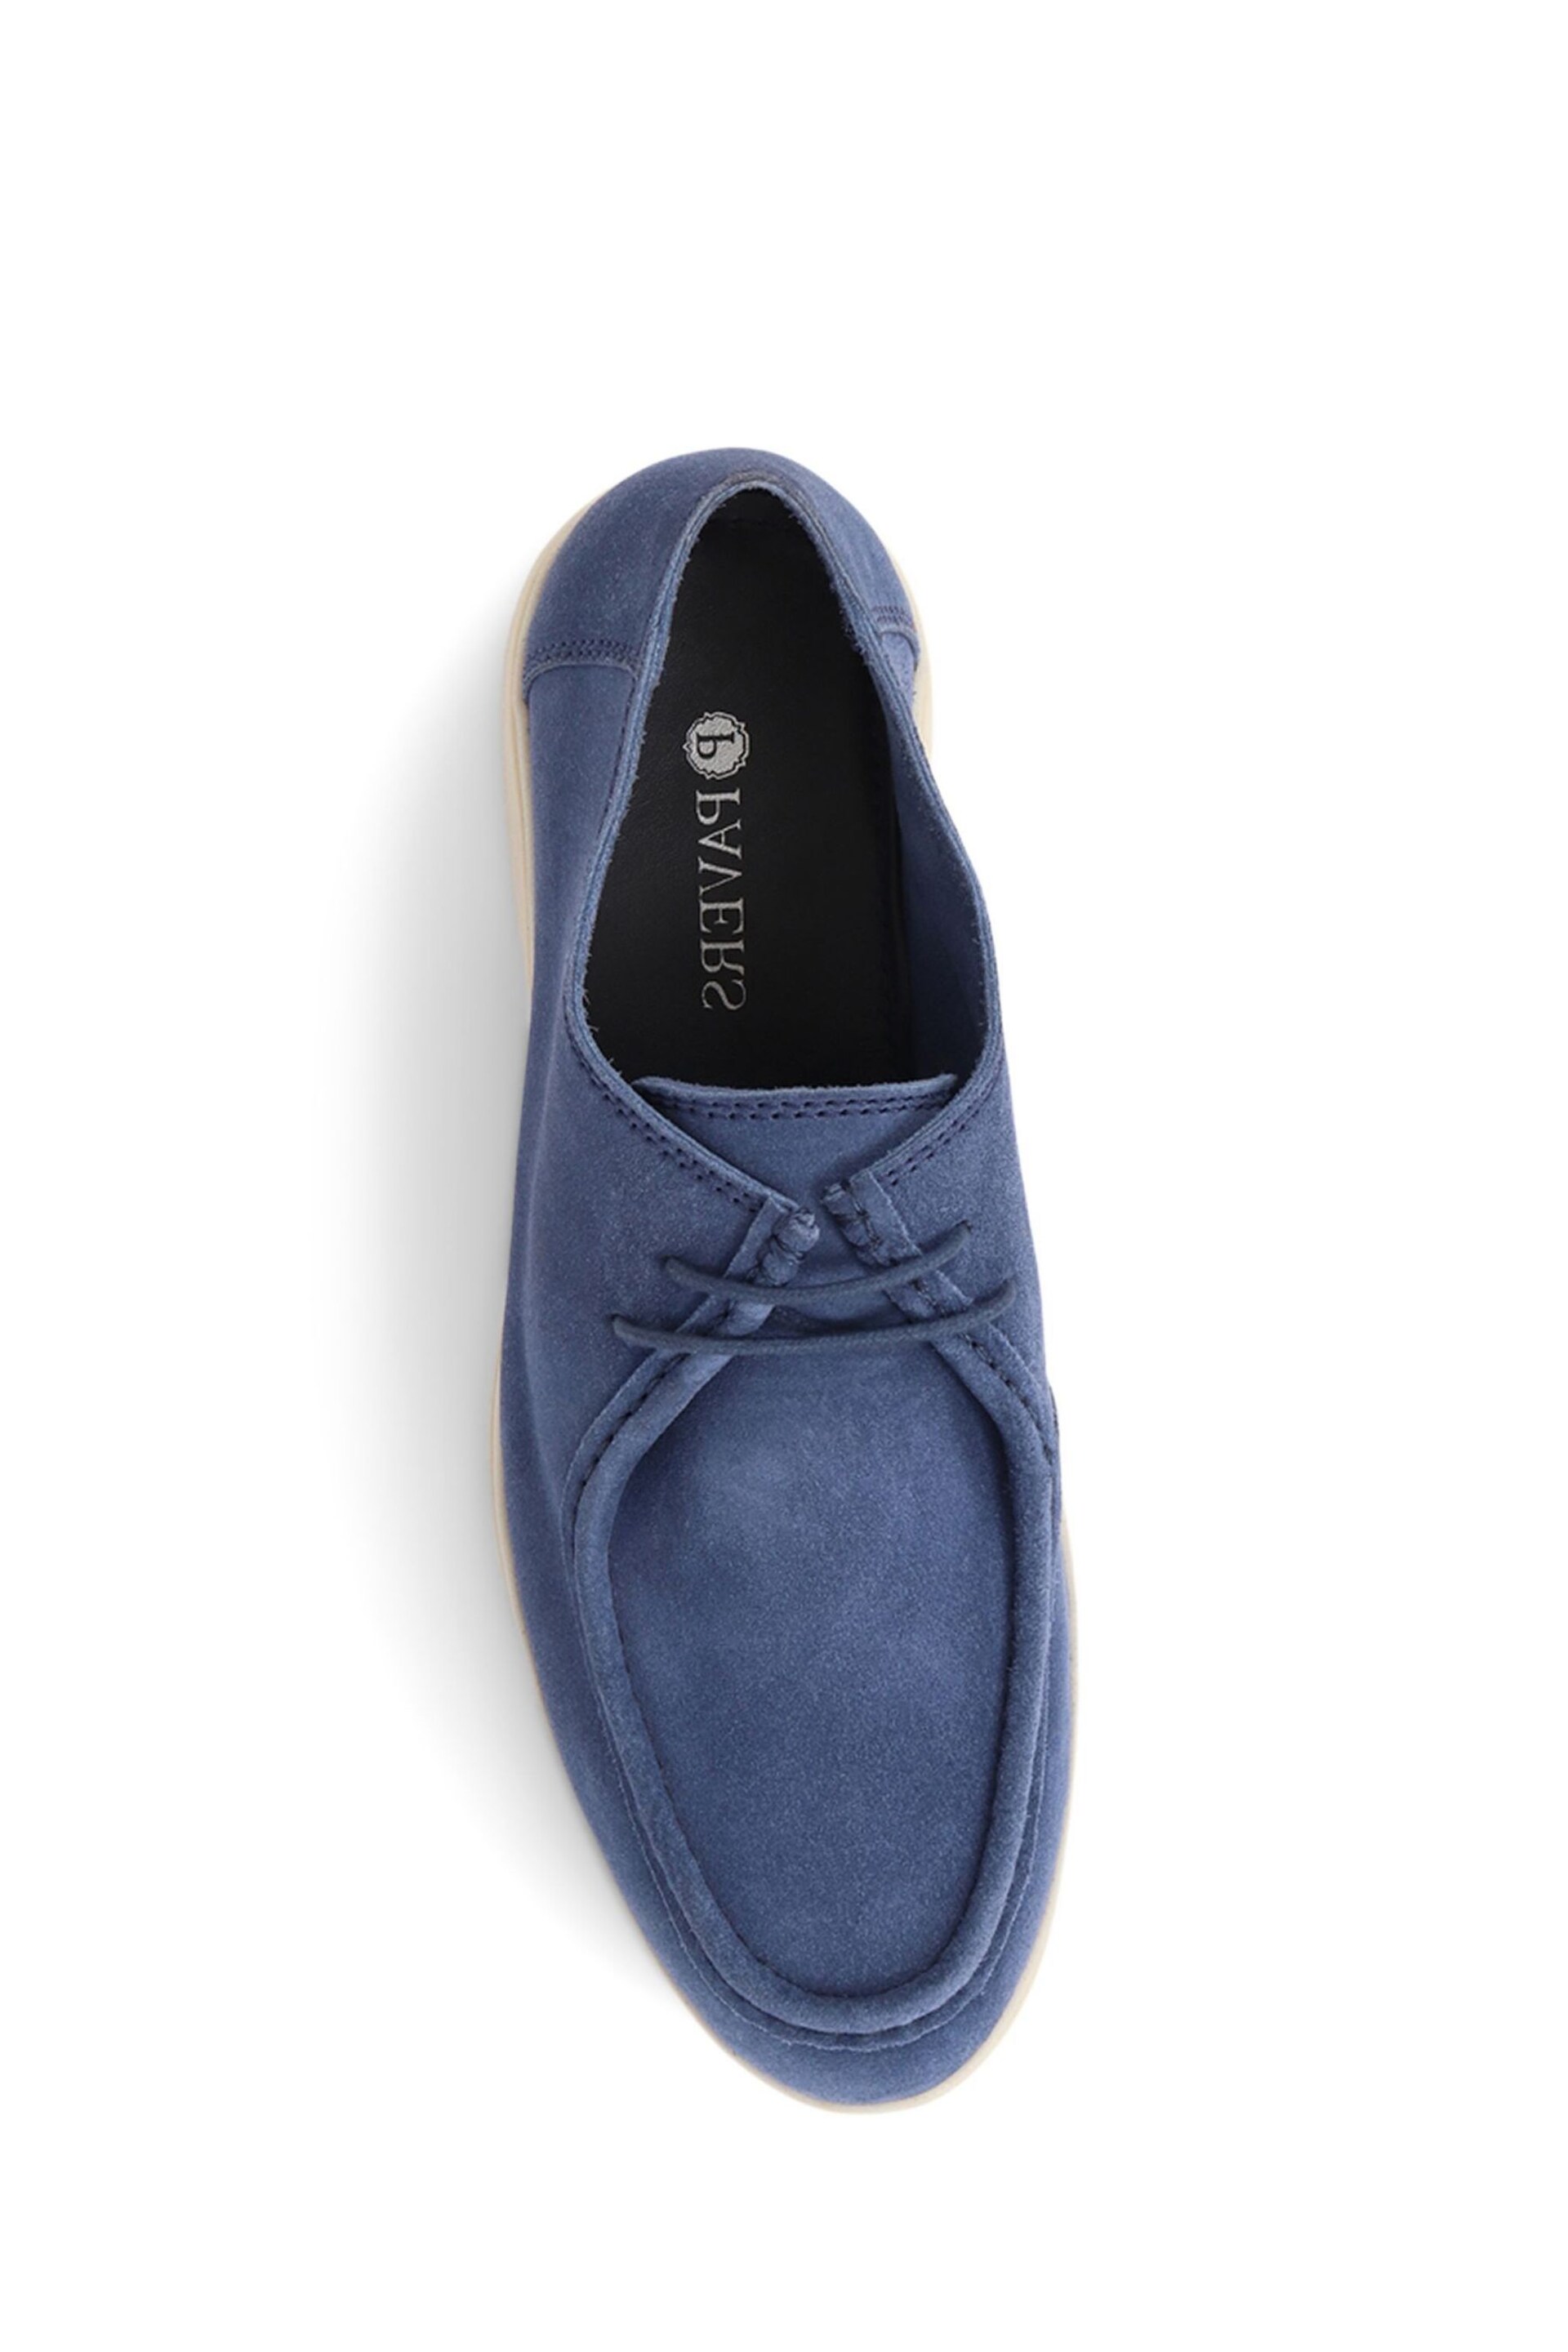 Pavers Blue Lace-Up Leather Loafers - Image 4 of 5